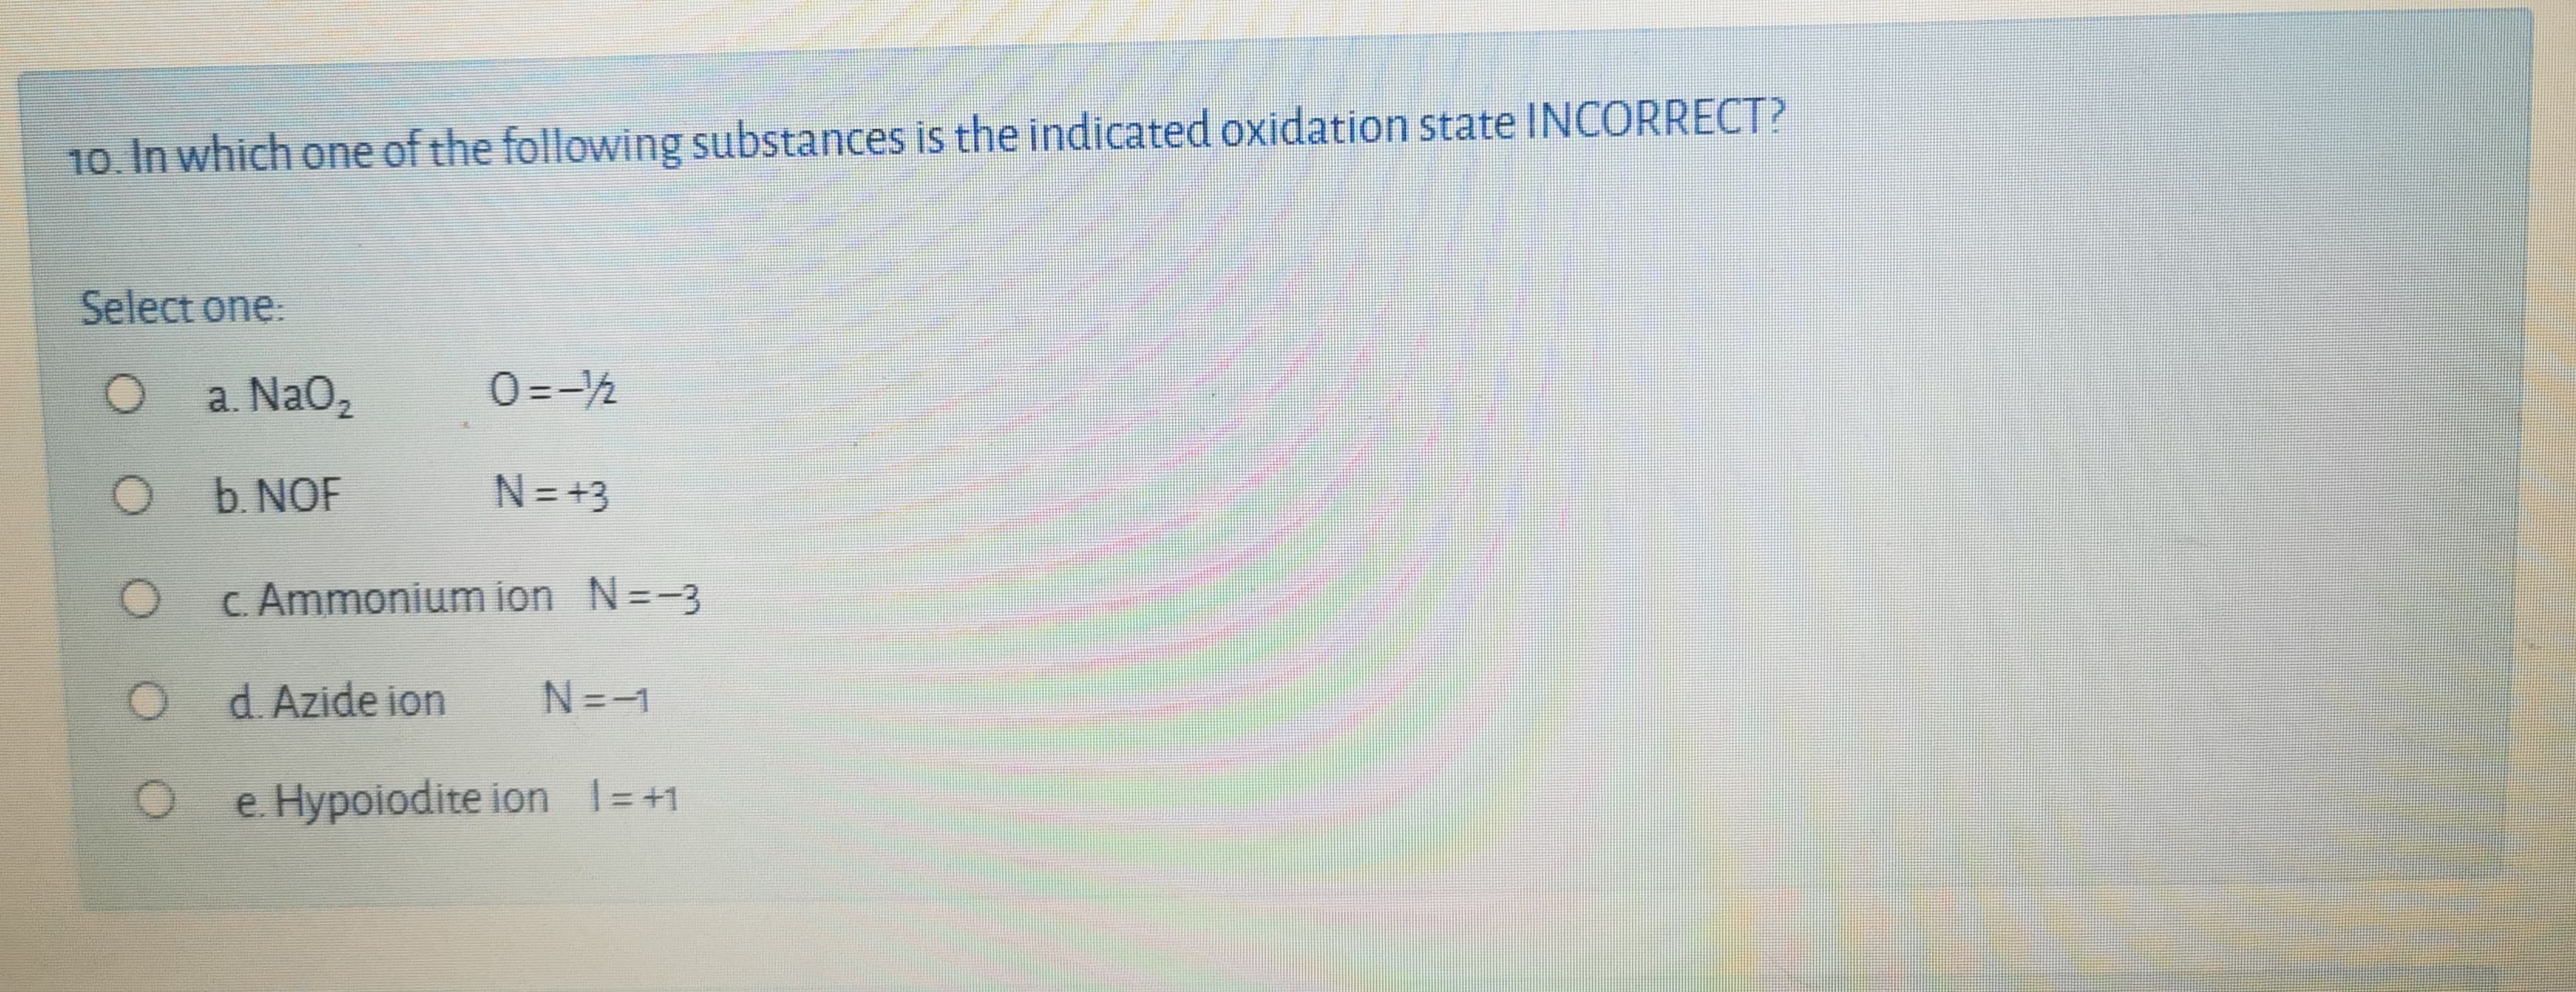 oxidation state INCORRECT?
